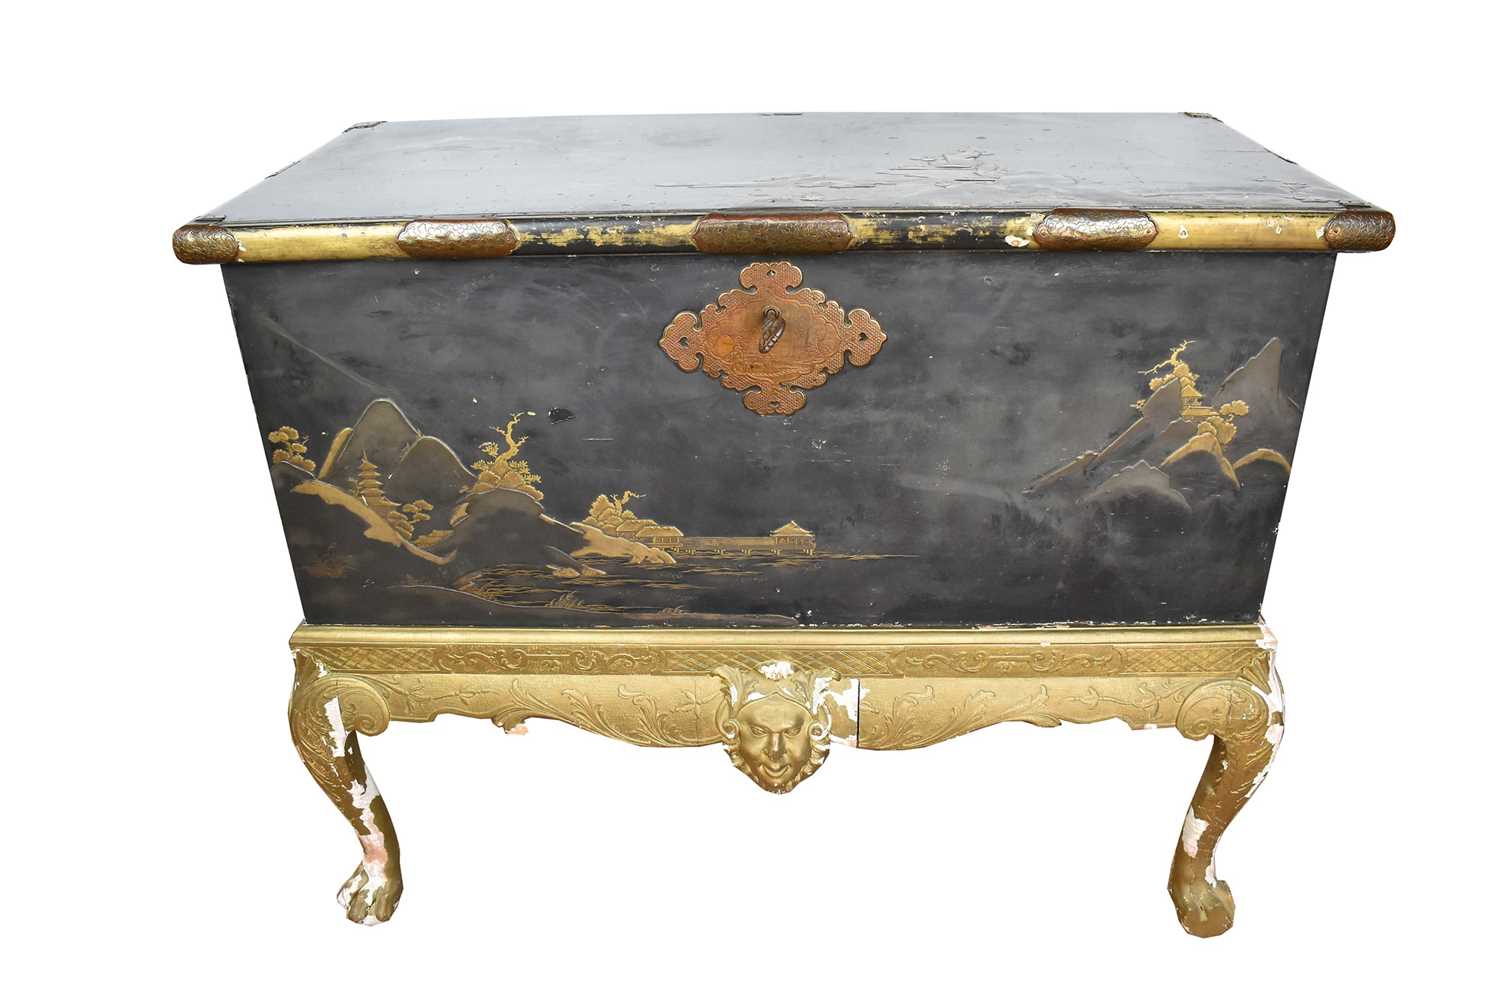 Lot 1567 - Fine early 18th Chinese lacquer chest on gilt stand